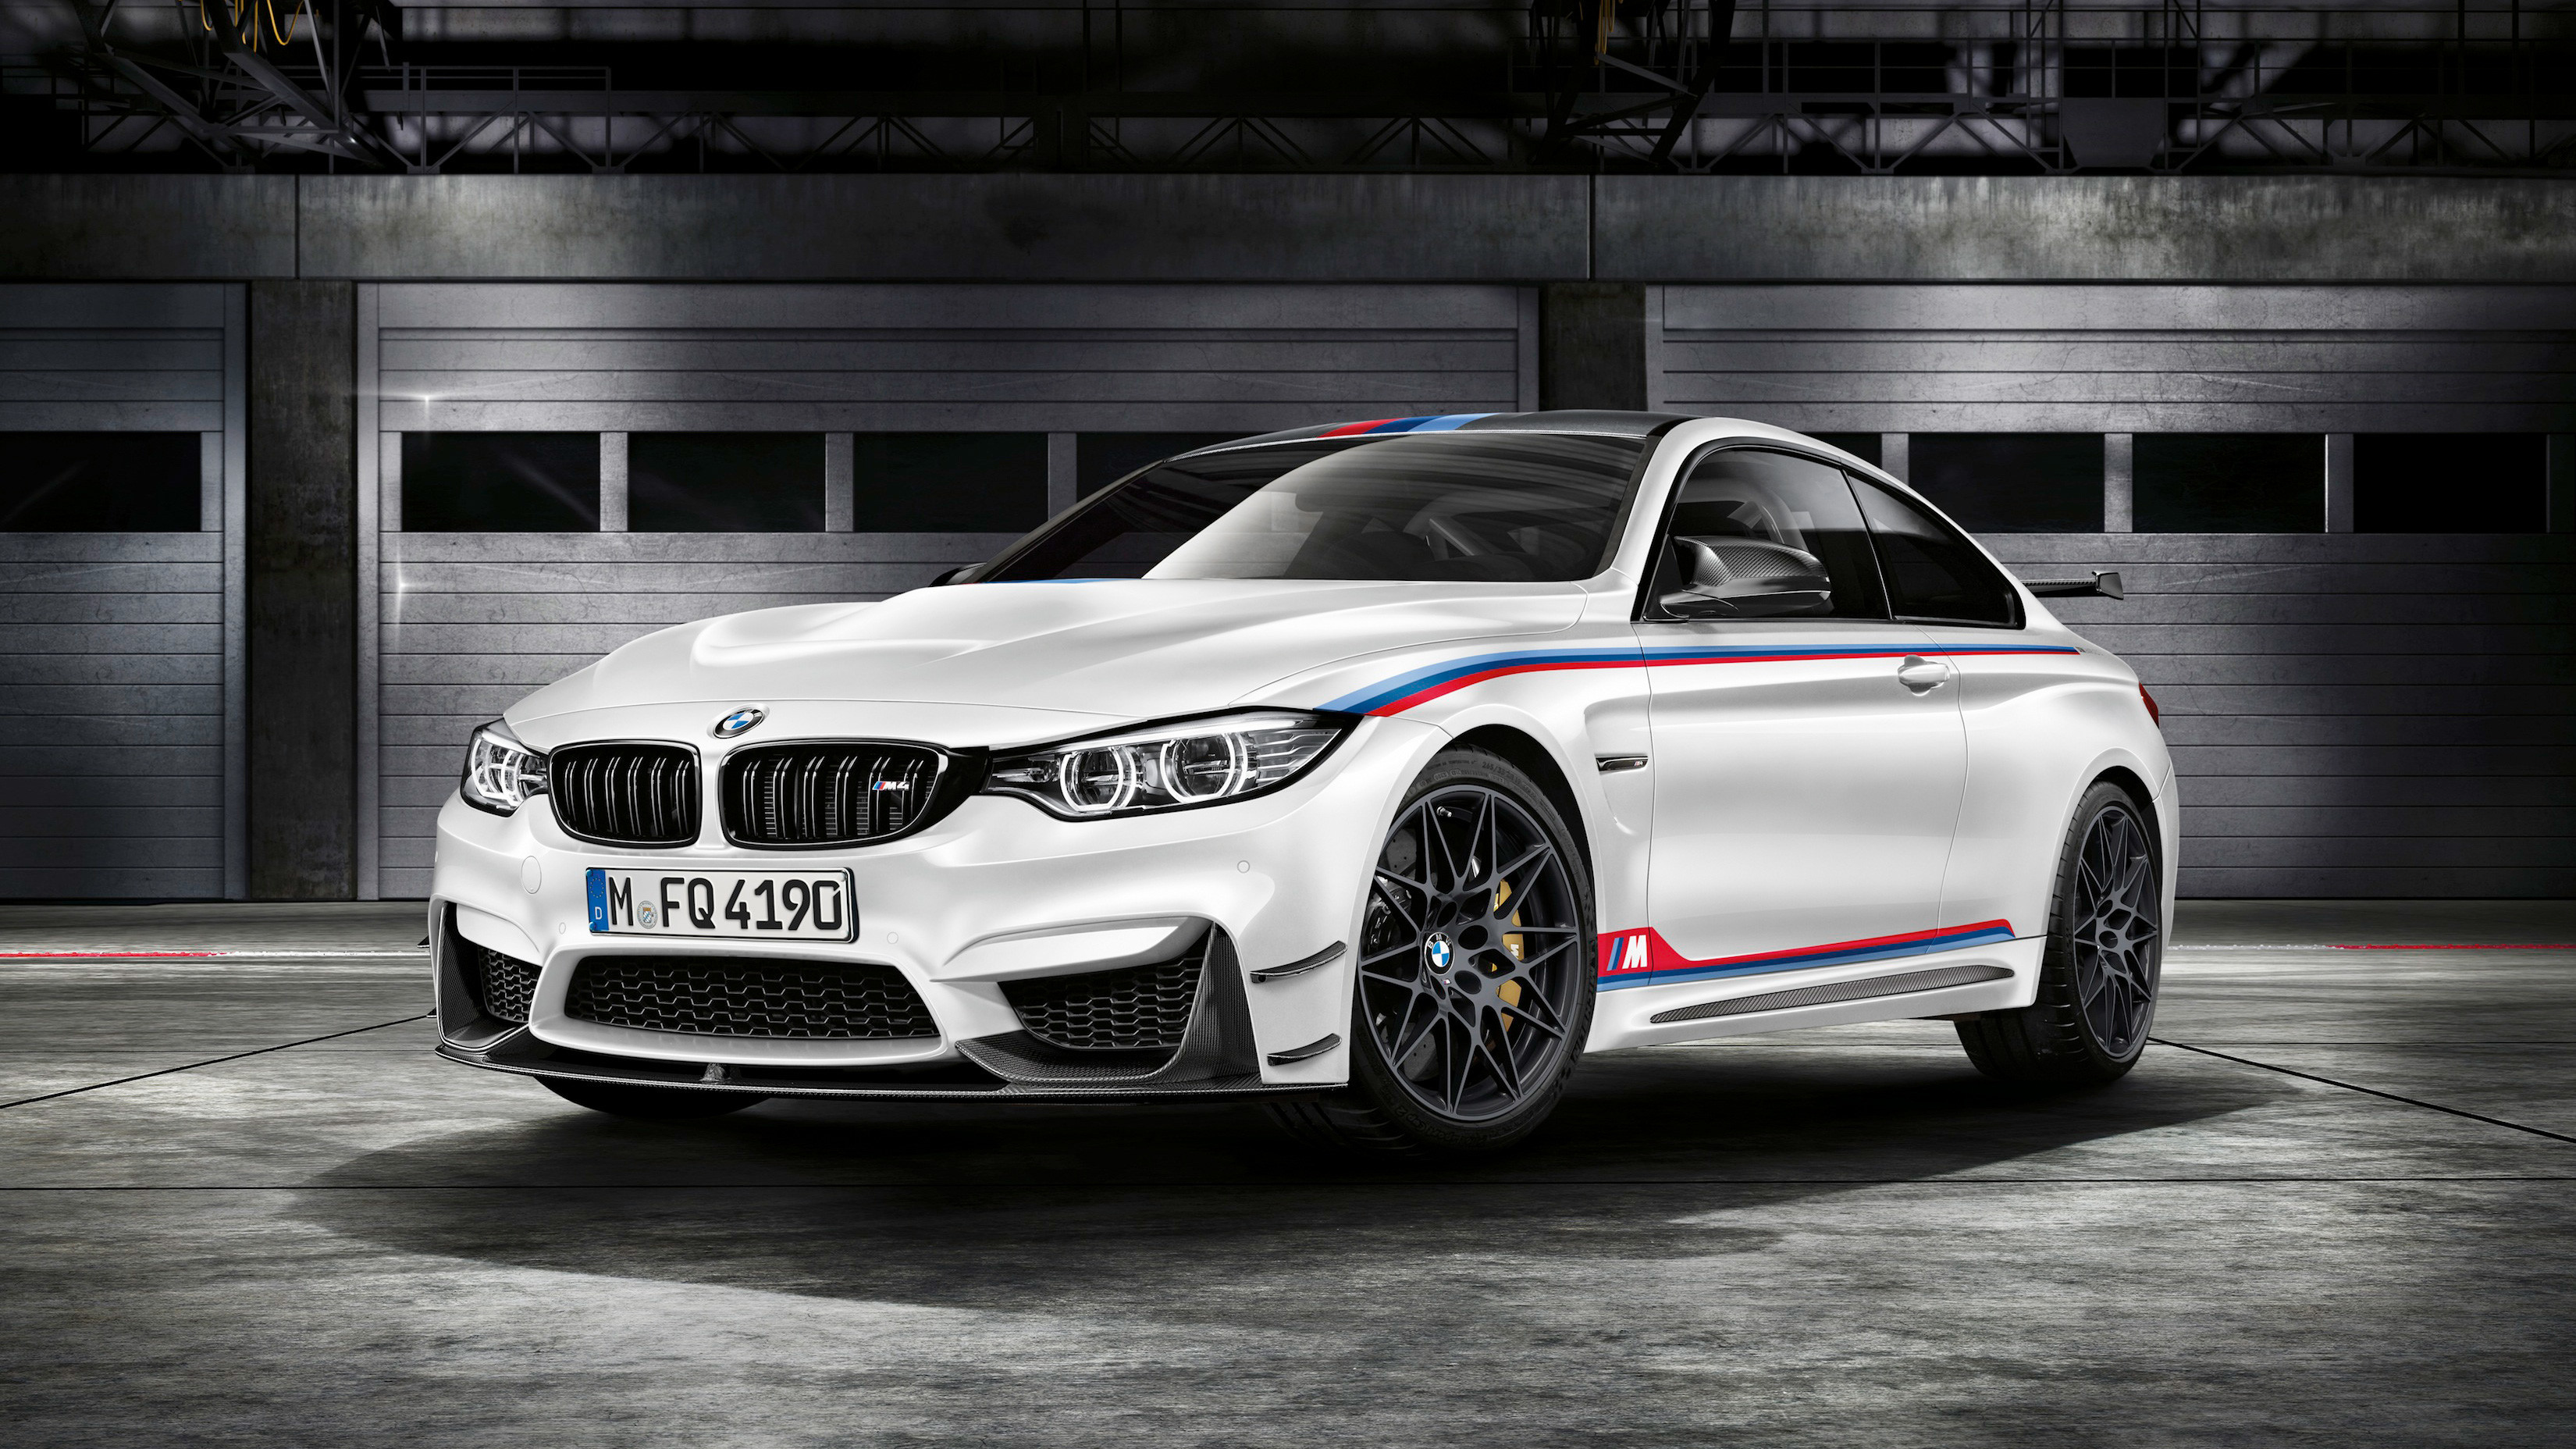 3300x1856, Large Police Car Wallpapers For Andro - Bmw M4 Dtm Champion Edition - HD Wallpaper 